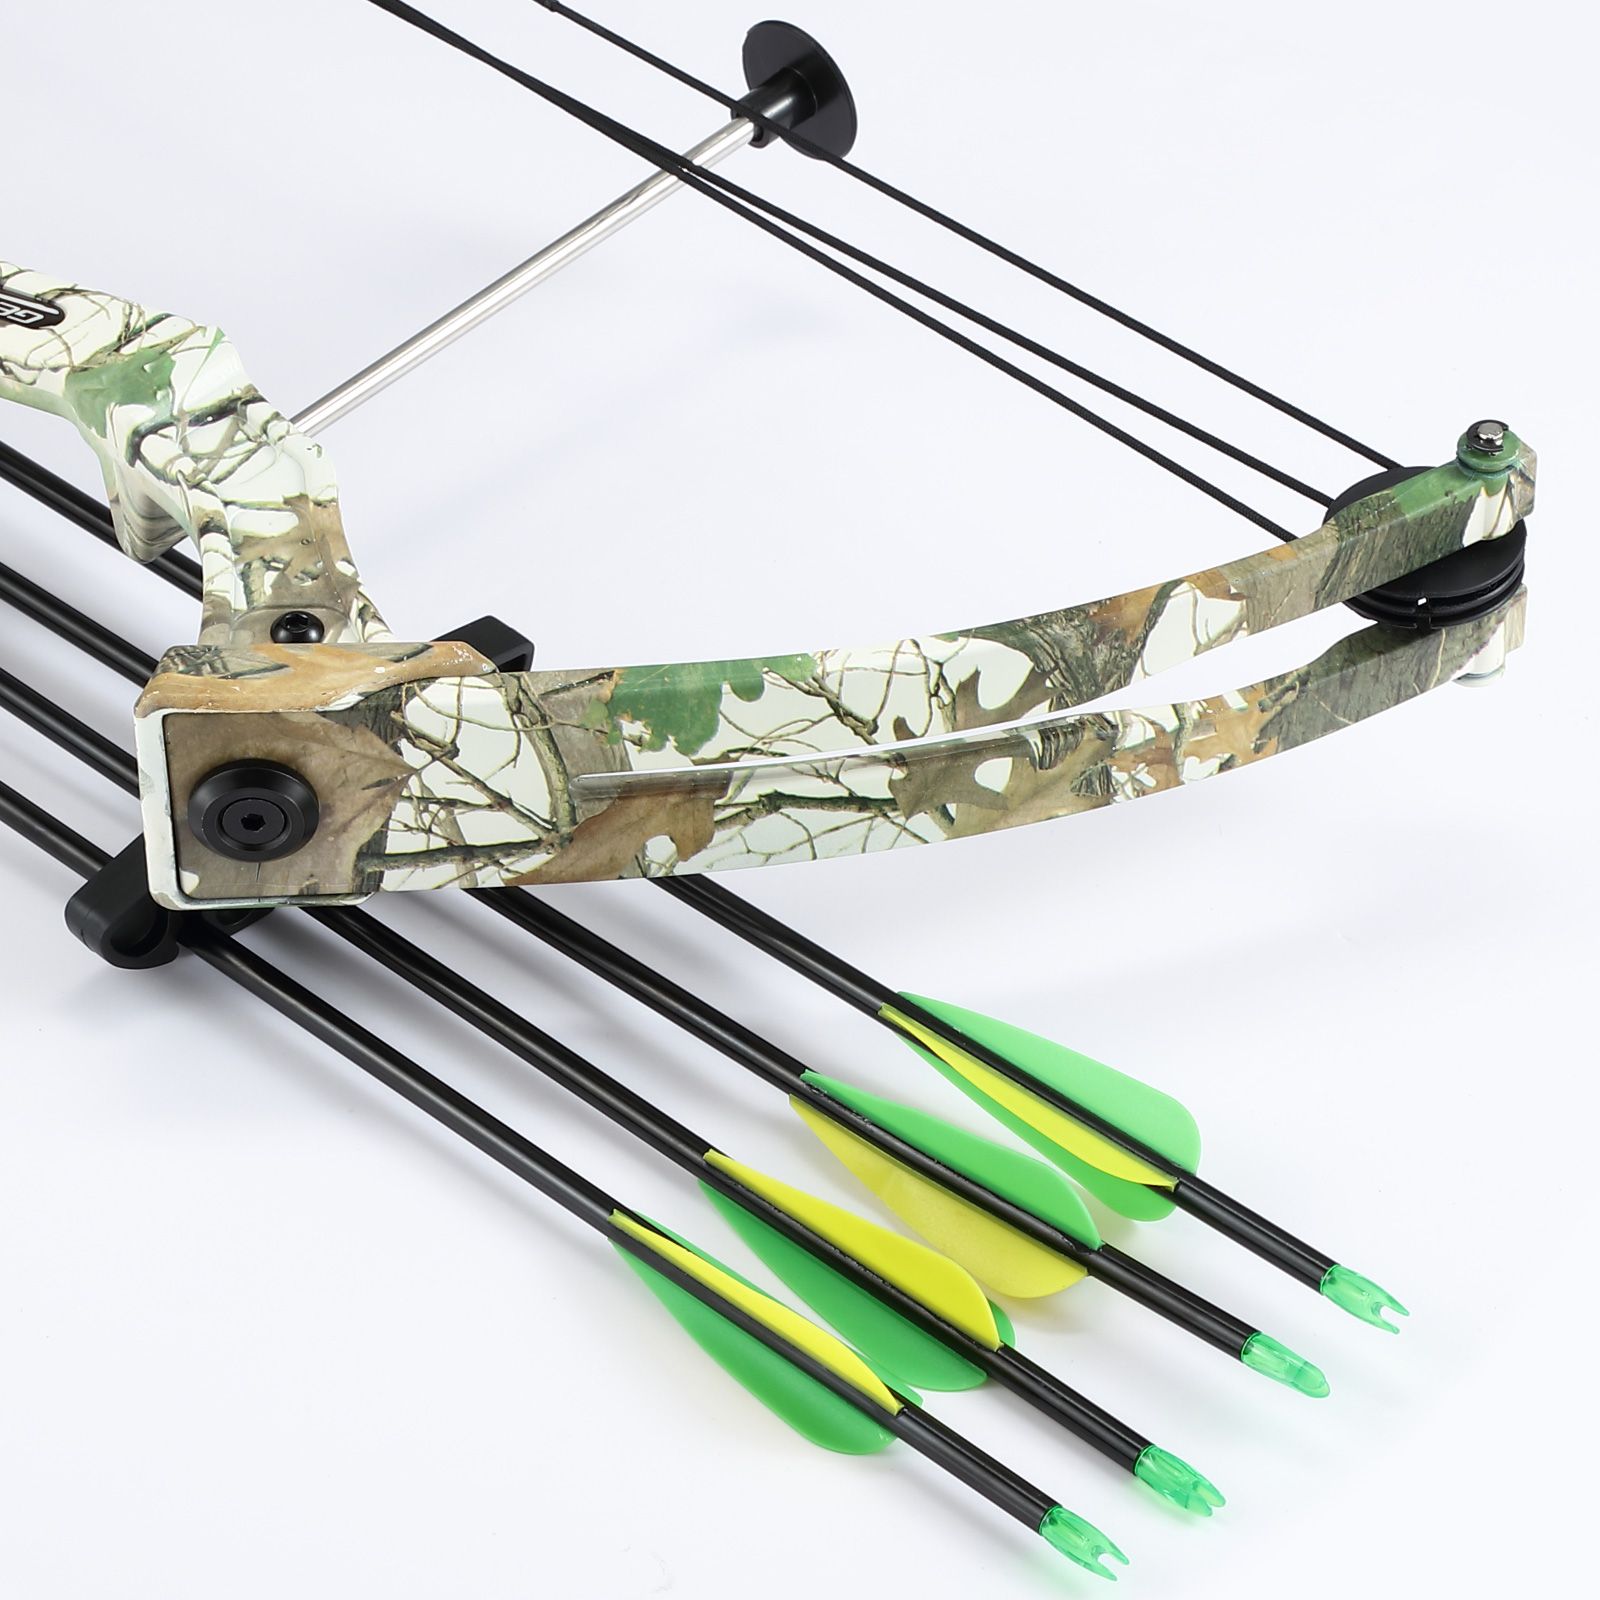 Compound Bow Arrow Set 15-20lbs Archery Sports Hunting Target Shooting RH Adjustable Speed for Youth Beginner Practice Camo